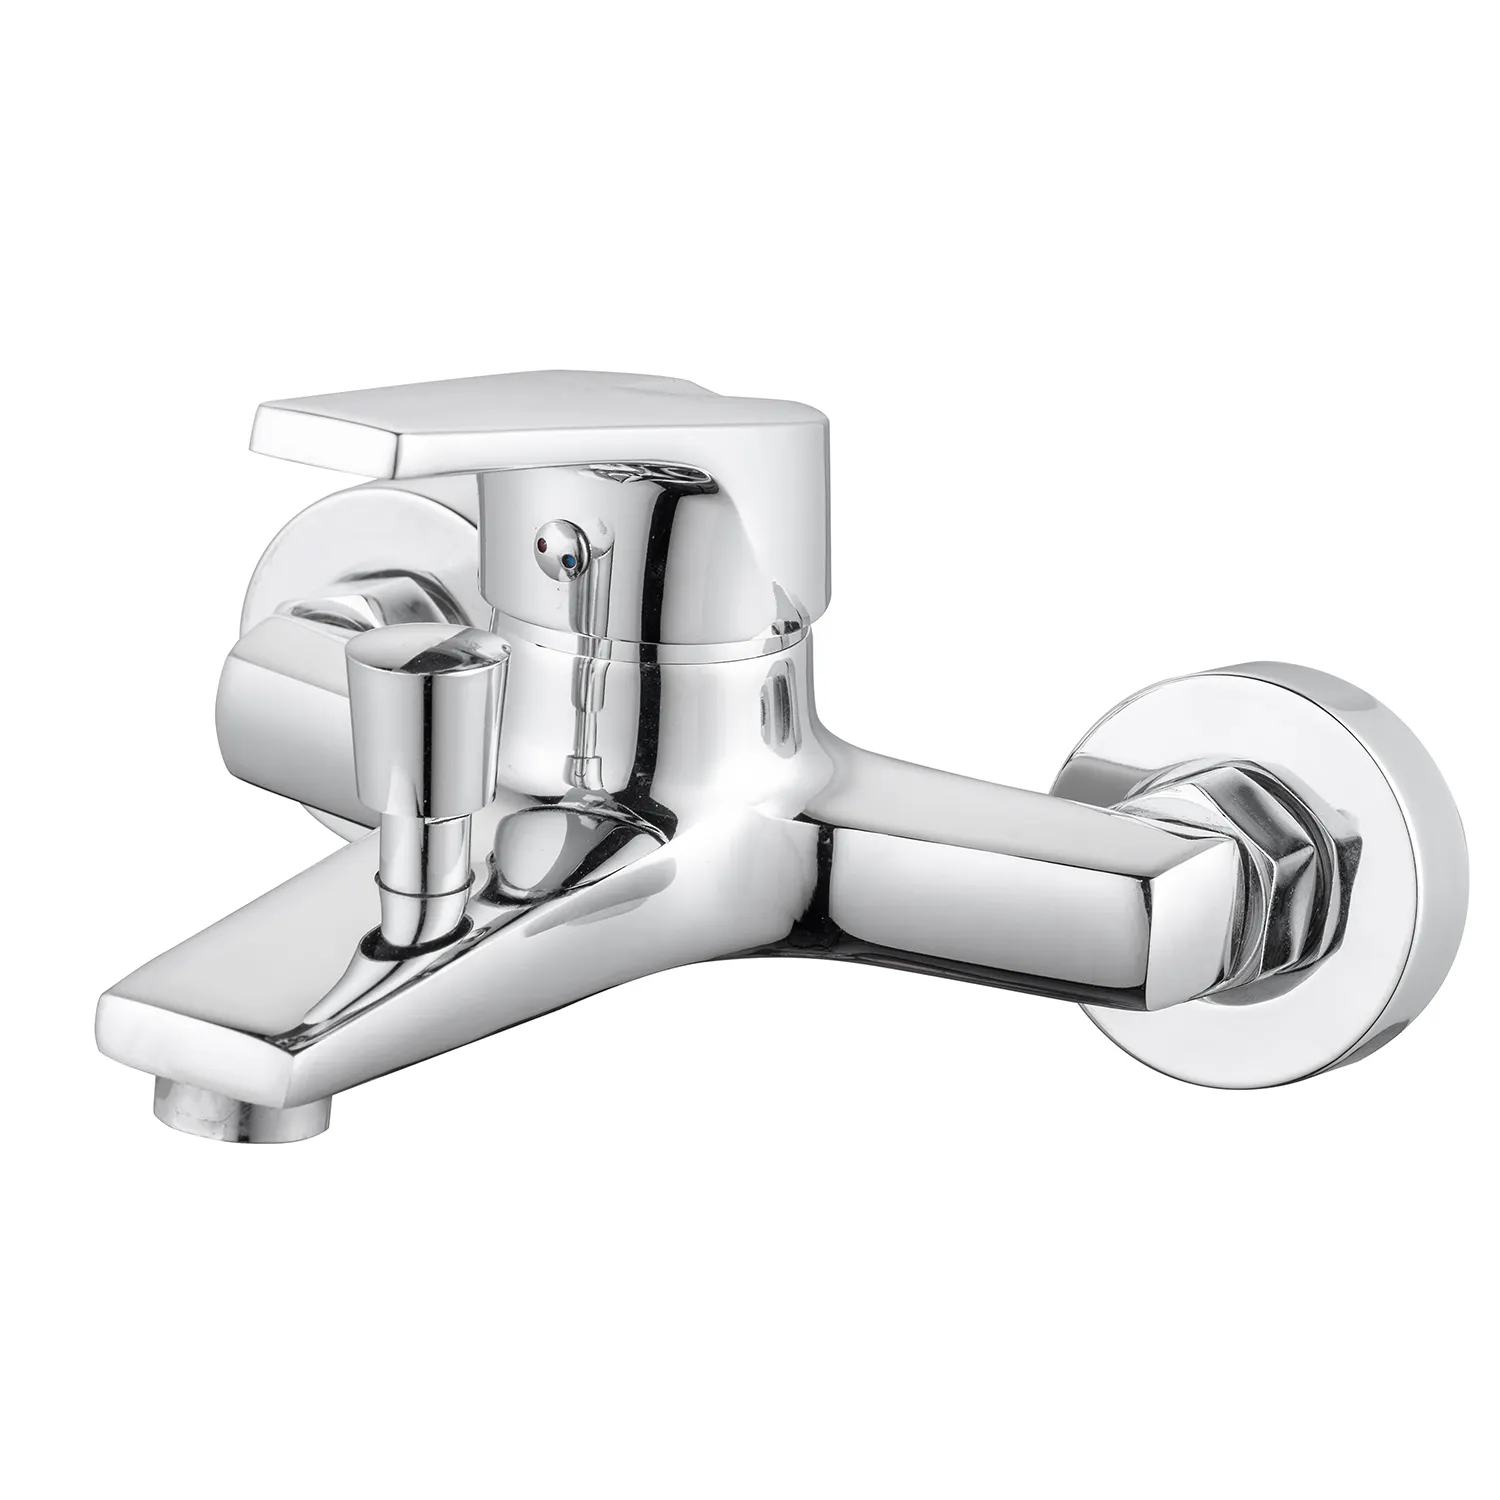 TB-MJ153 Tengbo brass wall mounted single handle european concealed tub and shower faucet